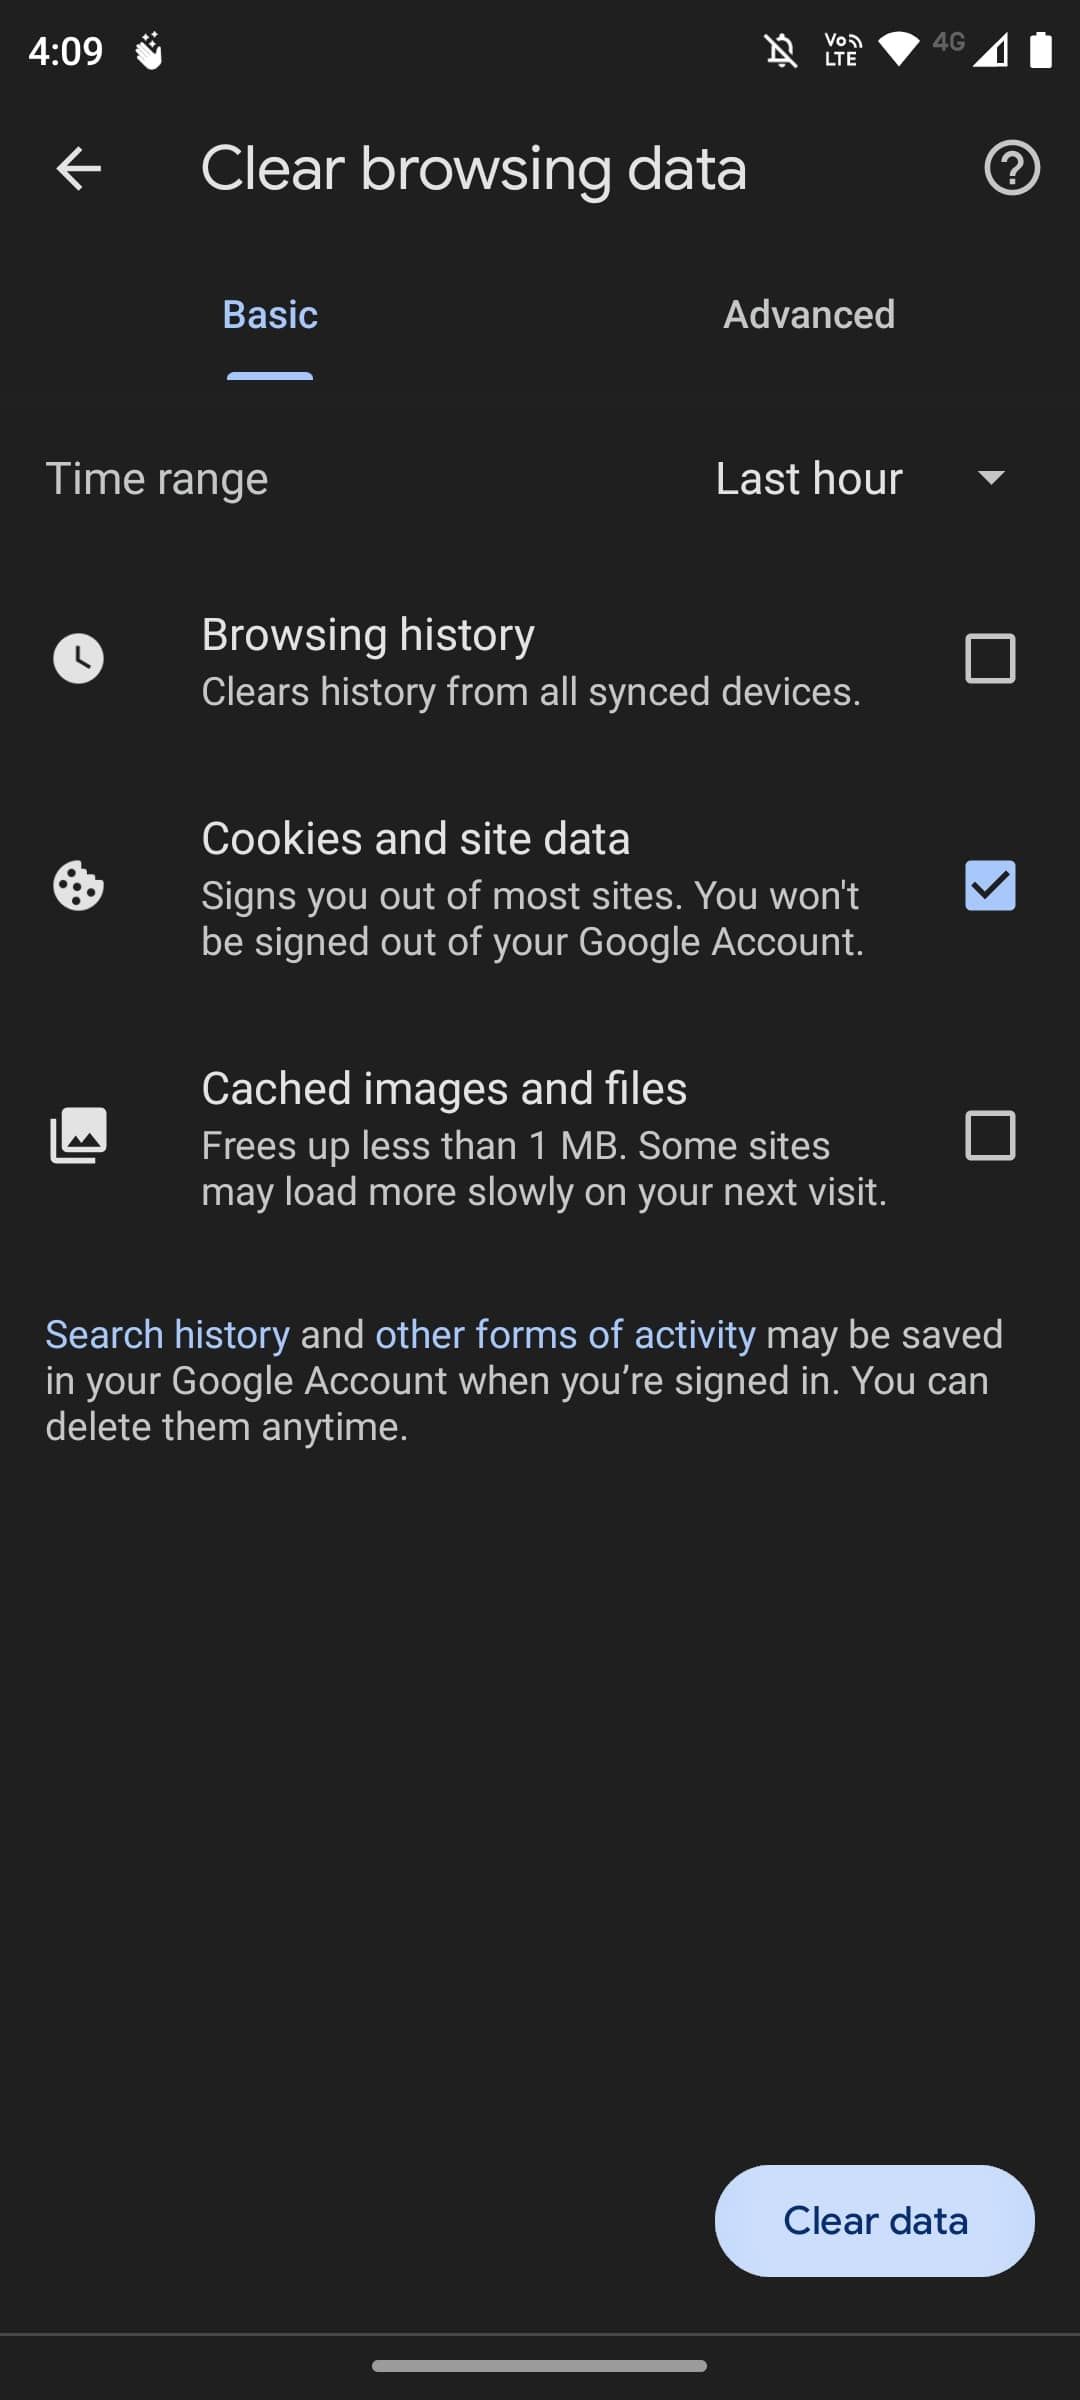 Chrome settings to clear browsing data